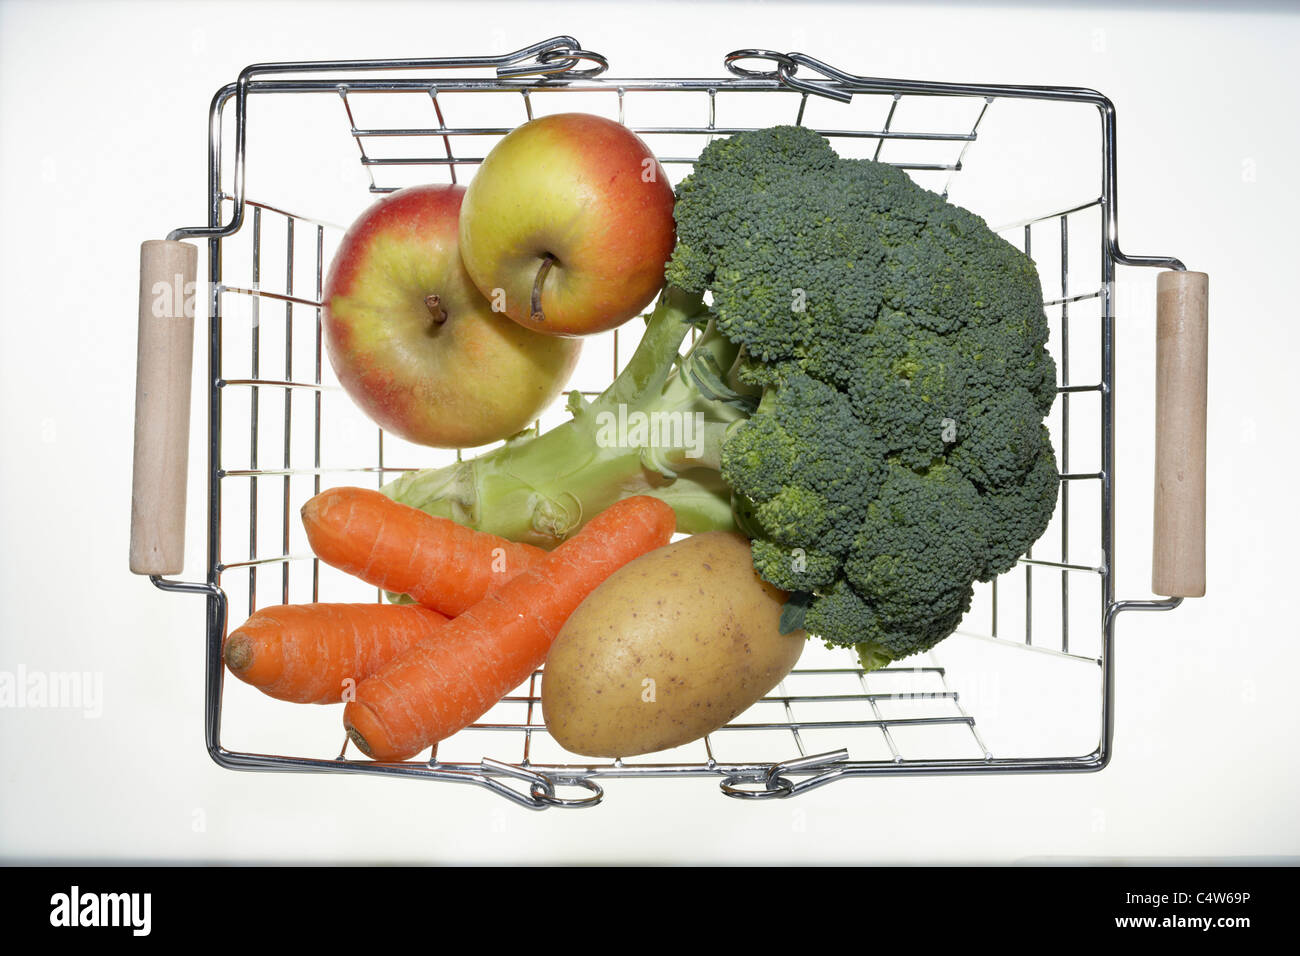 Fruit and Vegetables in Shopping Basket Stock Photo